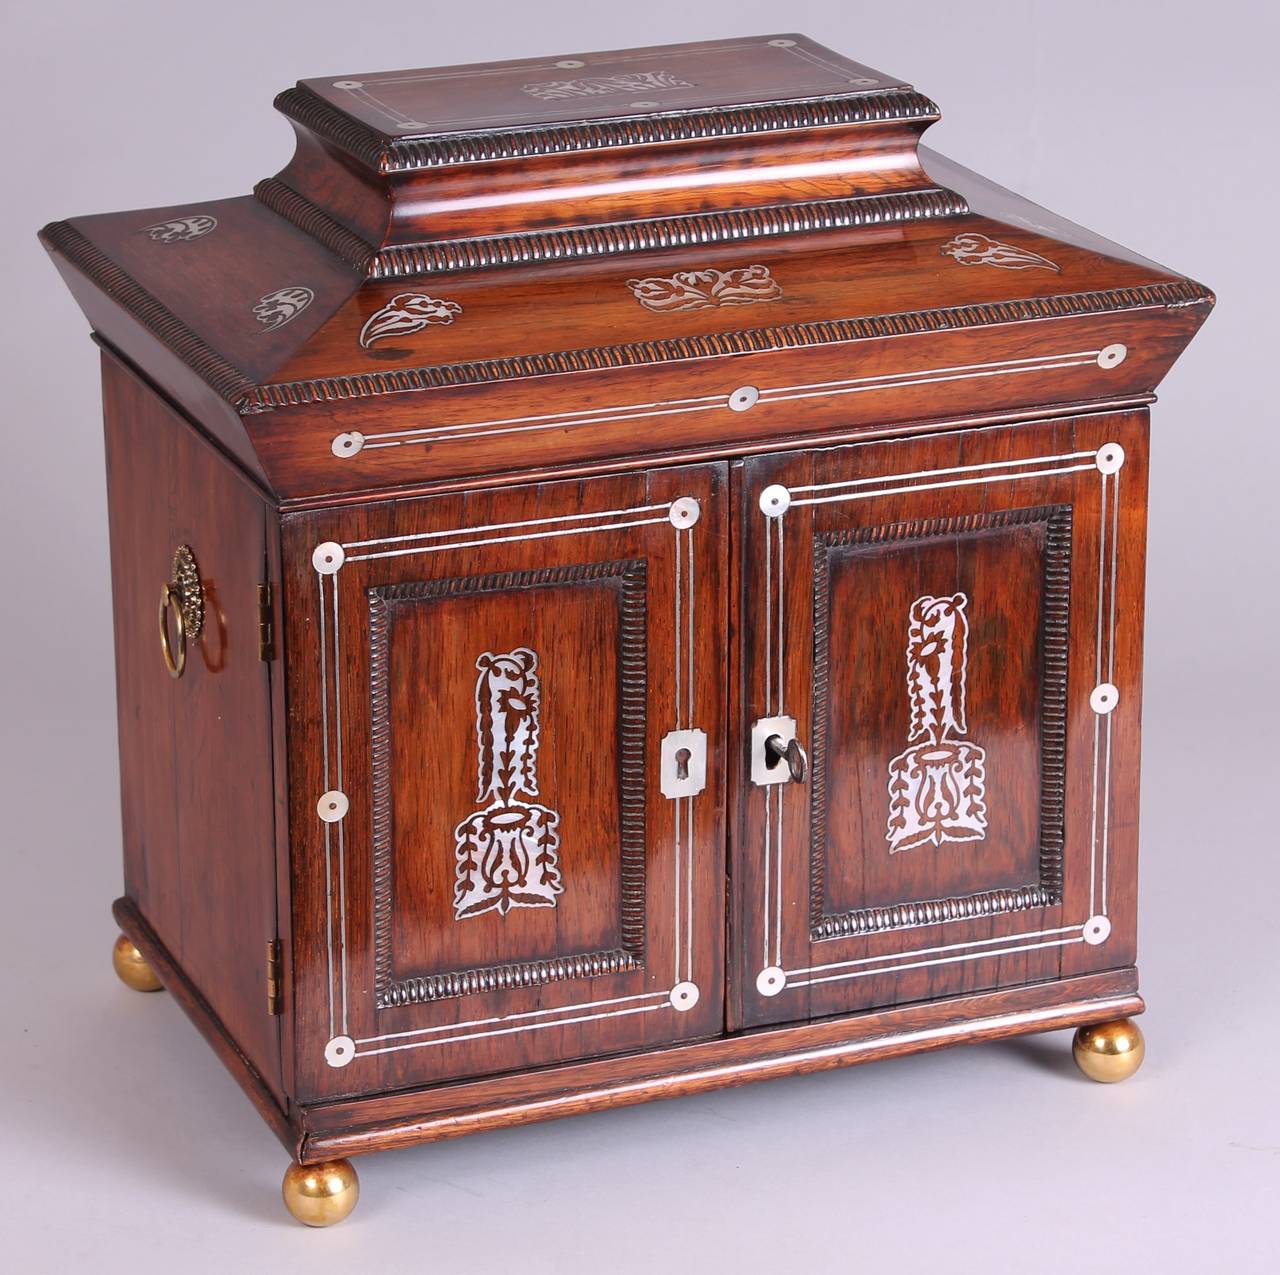 A William IV period rosewood and mother-of-pearl inlaid lady's table compendium; the deep hinged lid enclosing a fitted work-box with its original blue silk lining, and a pair of doors with three drawers behind; the lower one forming a removable